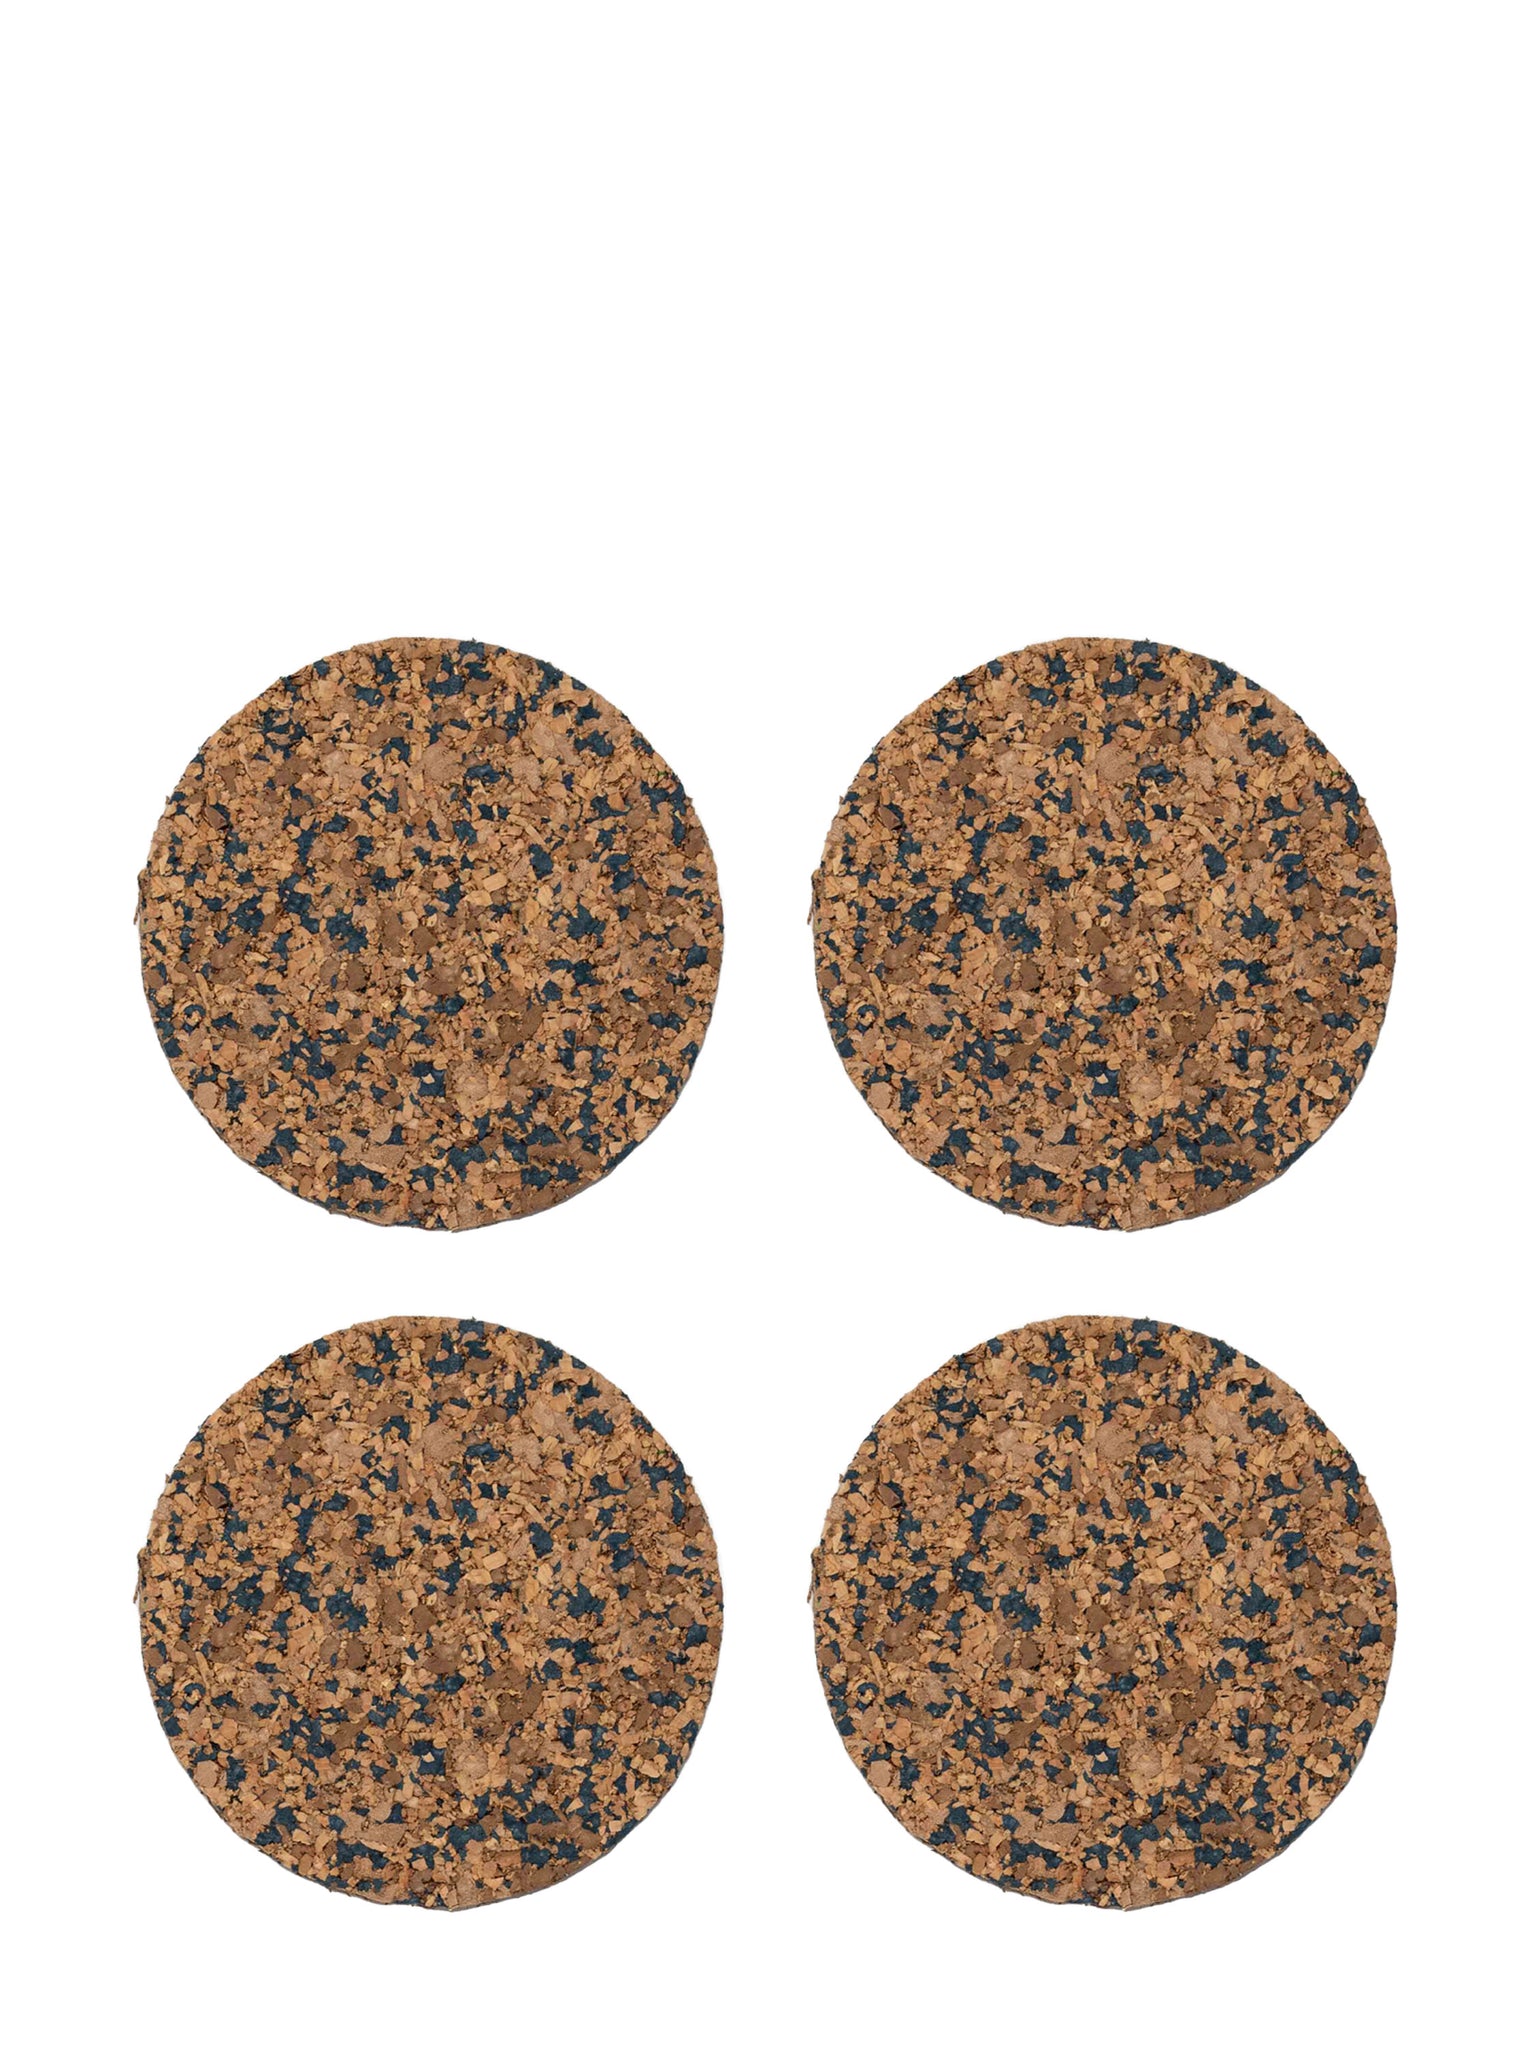 set of 4 navy recycled rounds cork coasters by Yod&CO